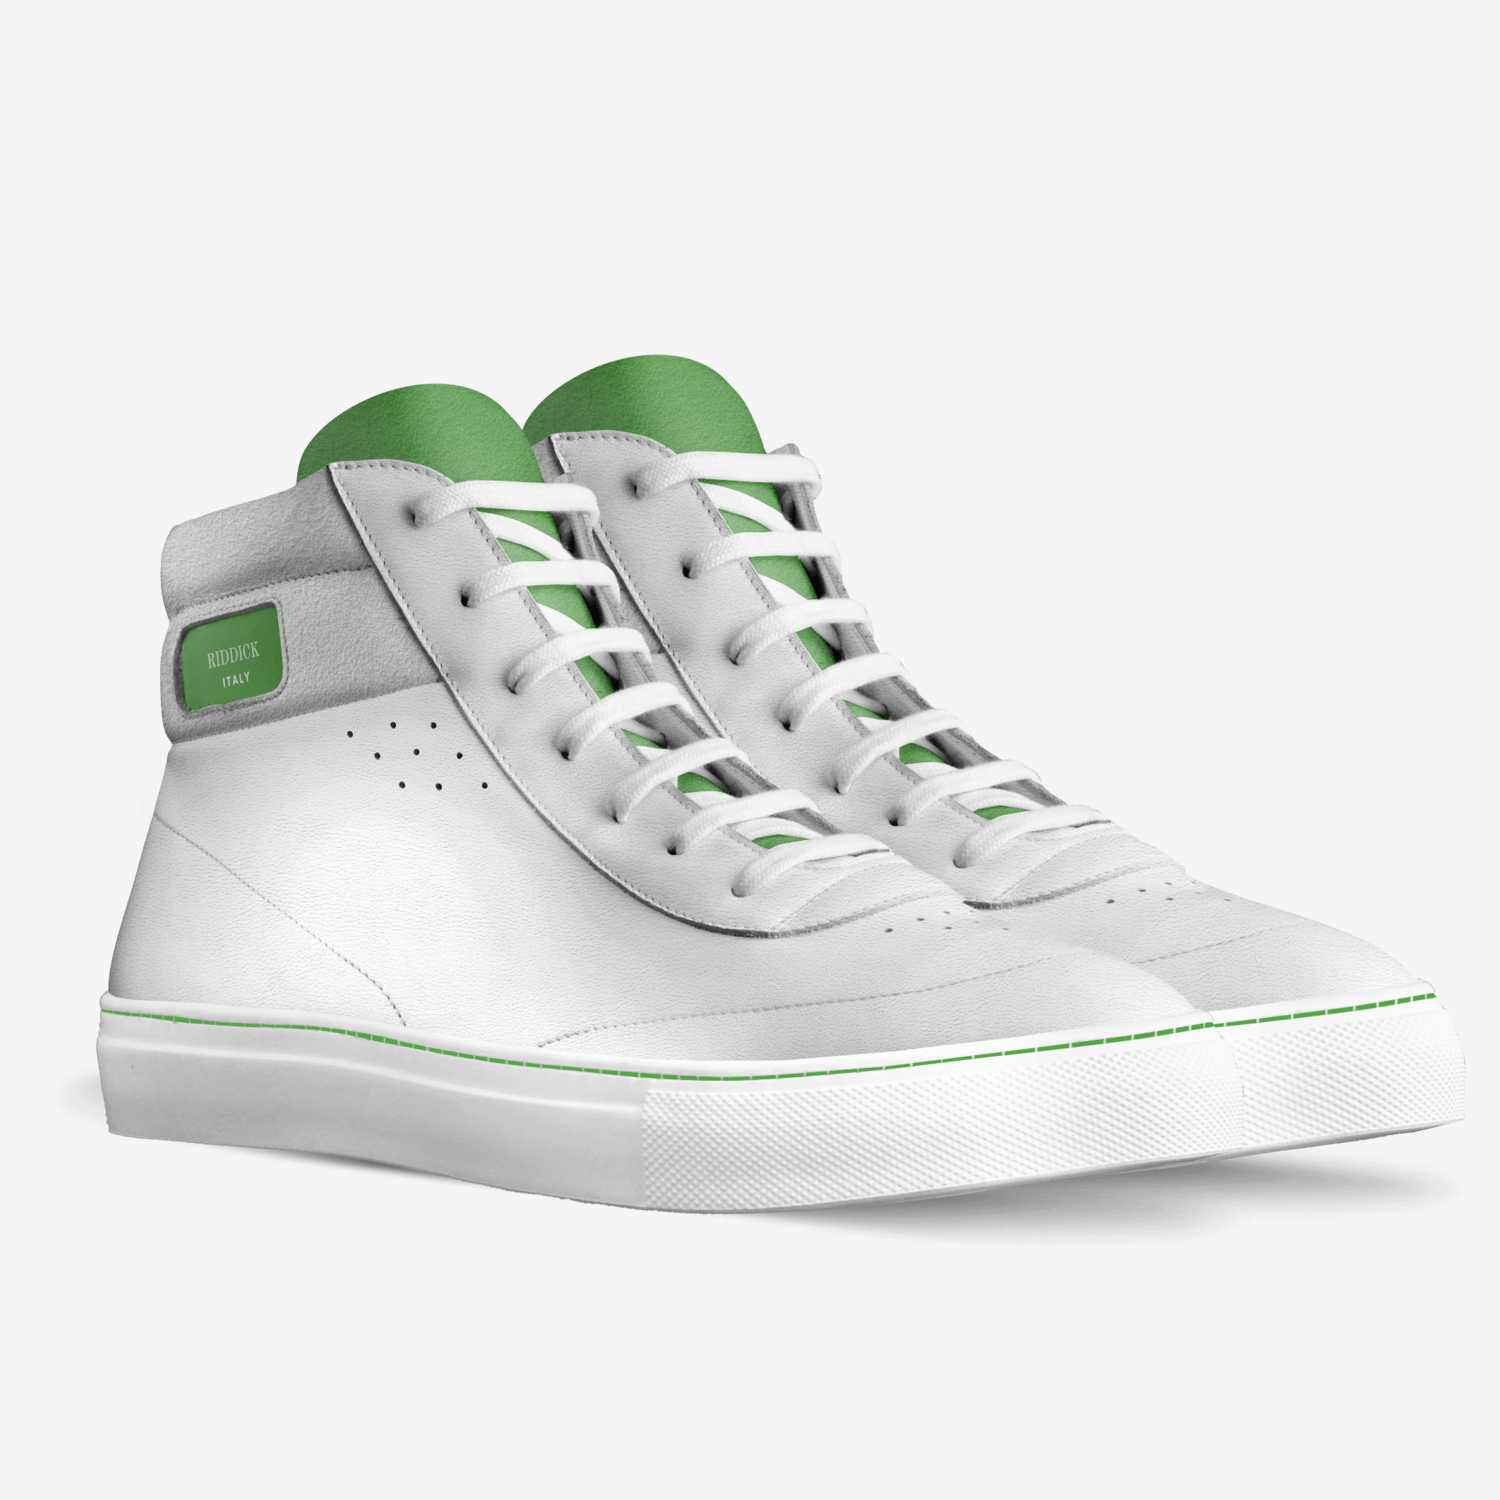 WHITE-OUT [UNISEX] - Riddick Shoes Shoe Riddick Shoes   